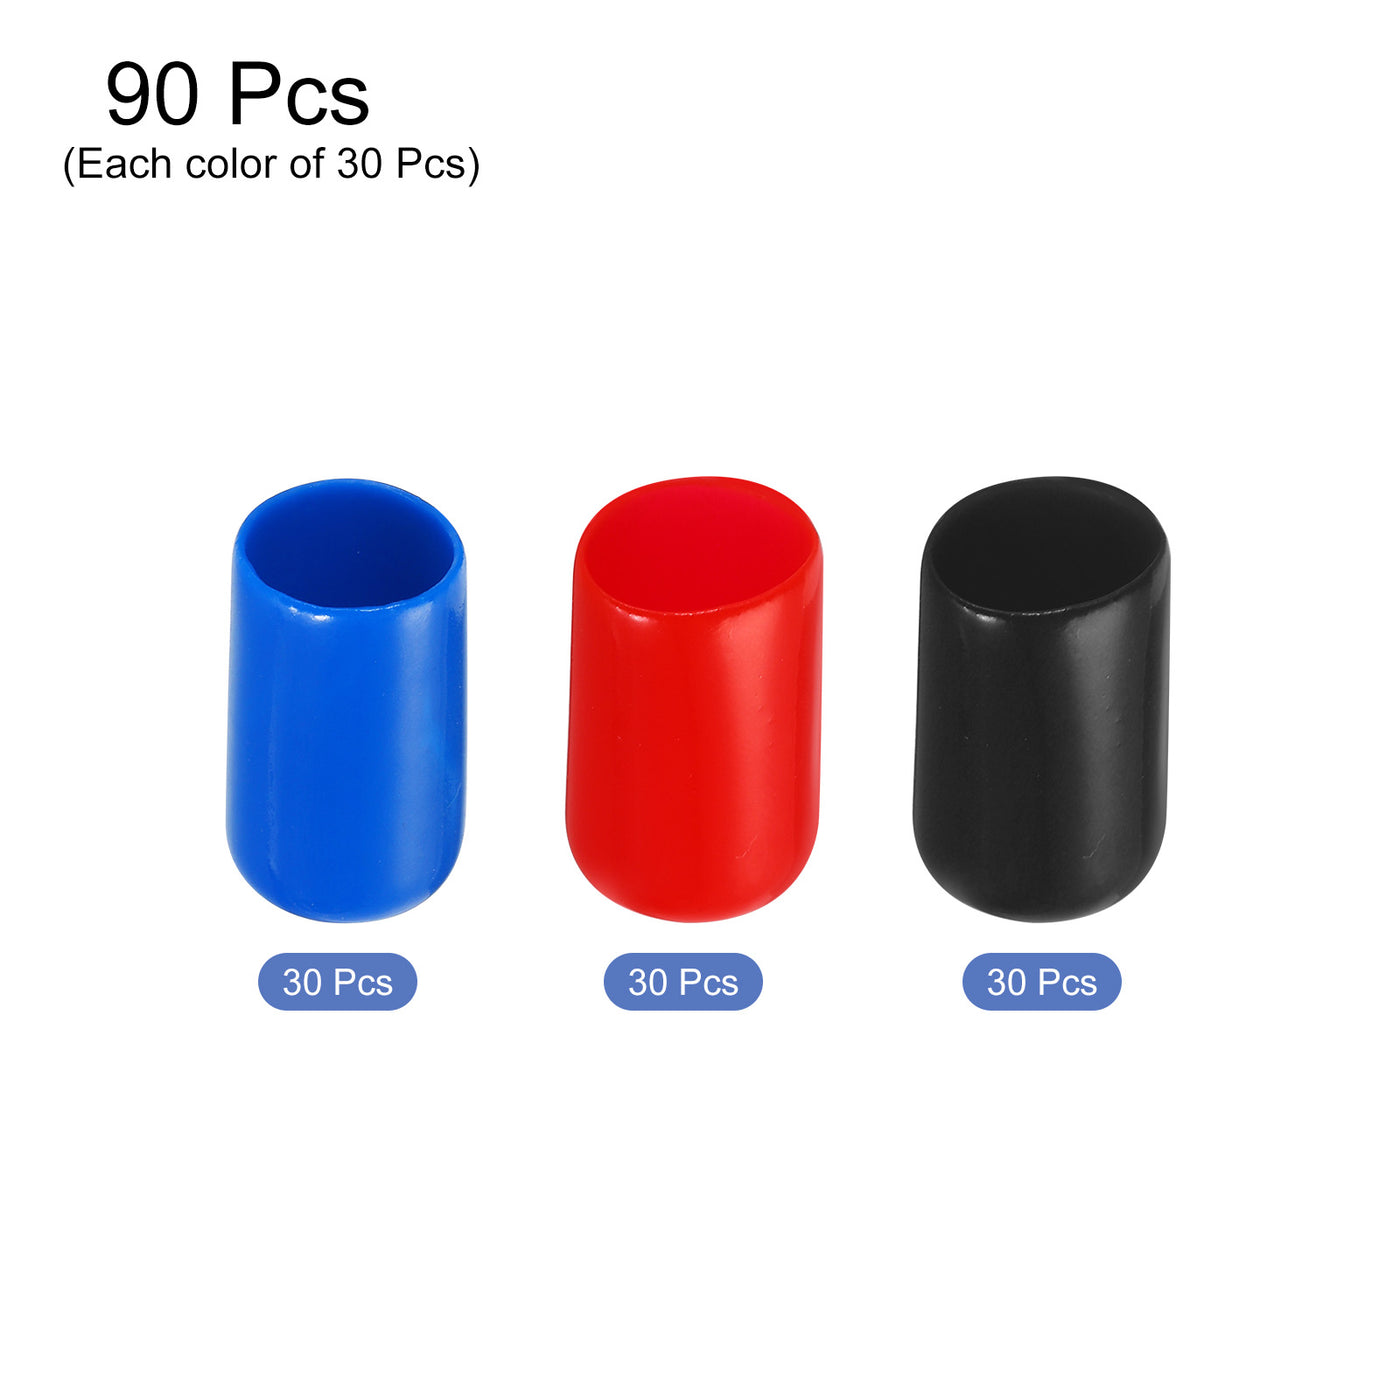 uxcell Uxcell 90pcs Rubber End Caps 11mm ID Vinyl PVC Round Tube Bolt Cap Cover Screw Thread Protectors, Black Red Blue